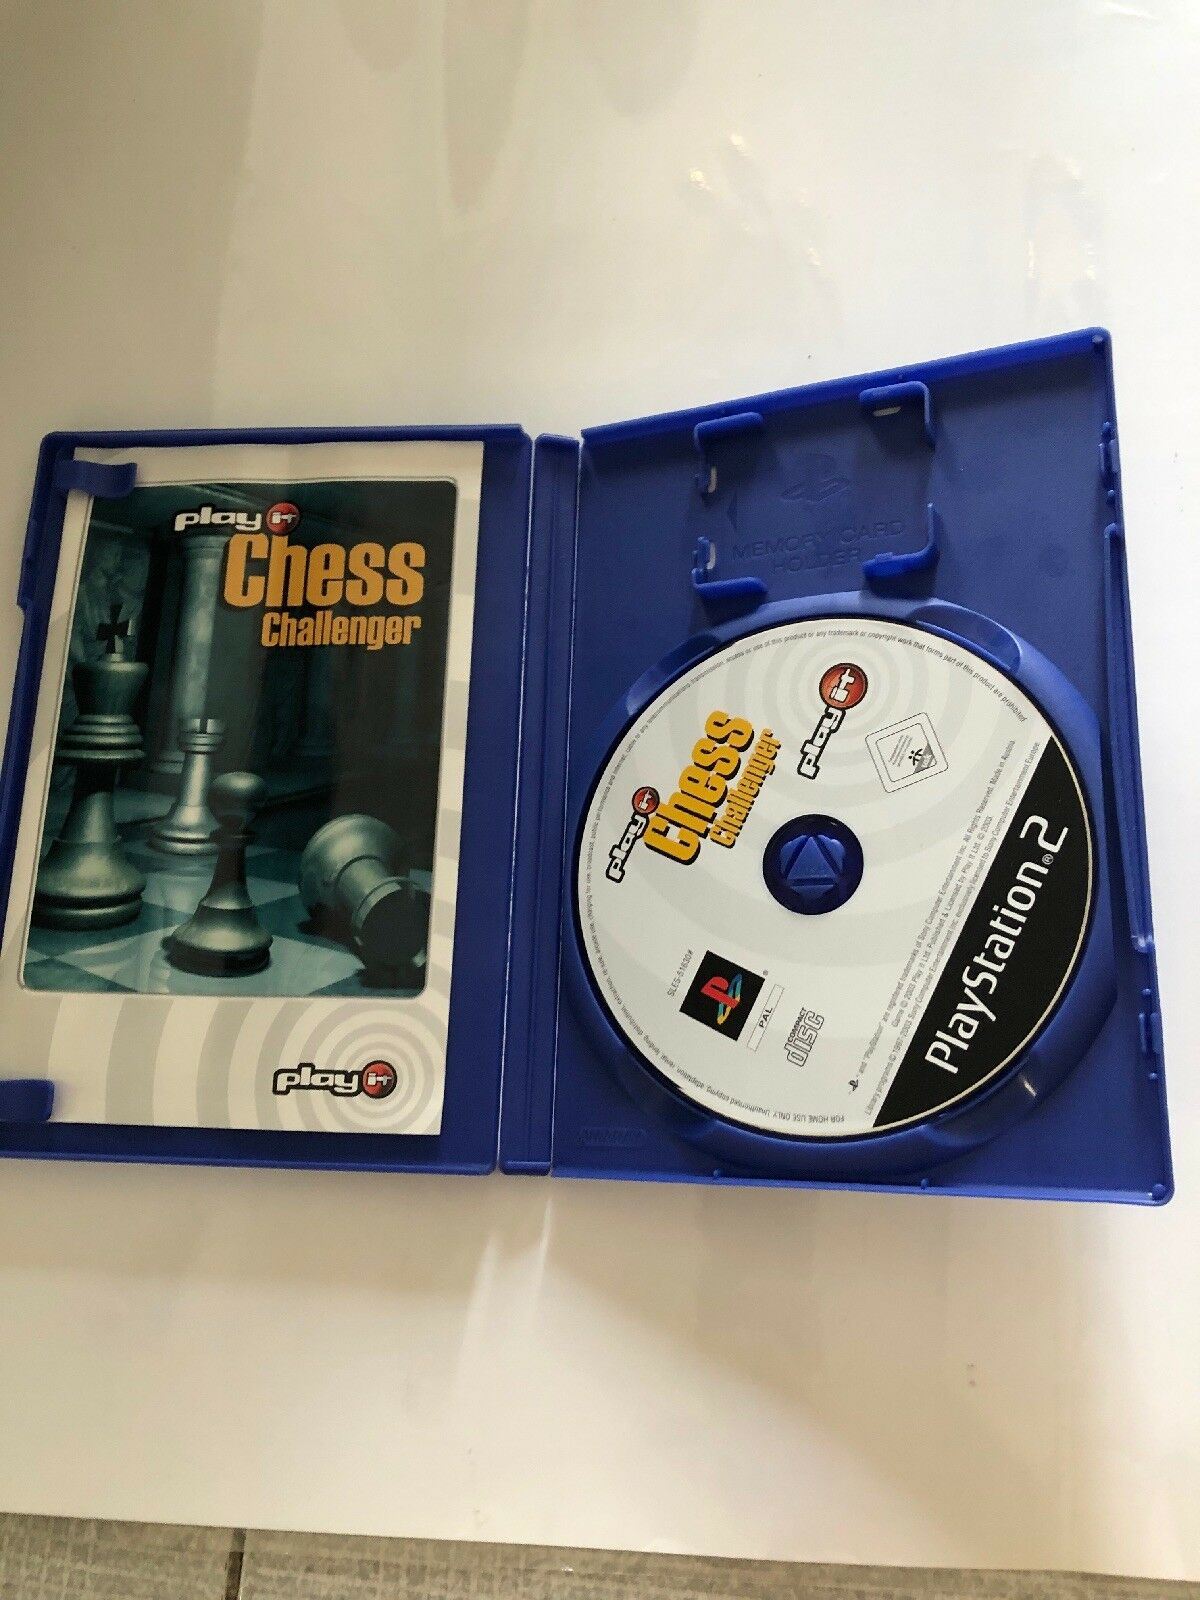 Play it Chess Challenger (Sony Playstation 2 PS2 Pal Complete - Free Shipping!